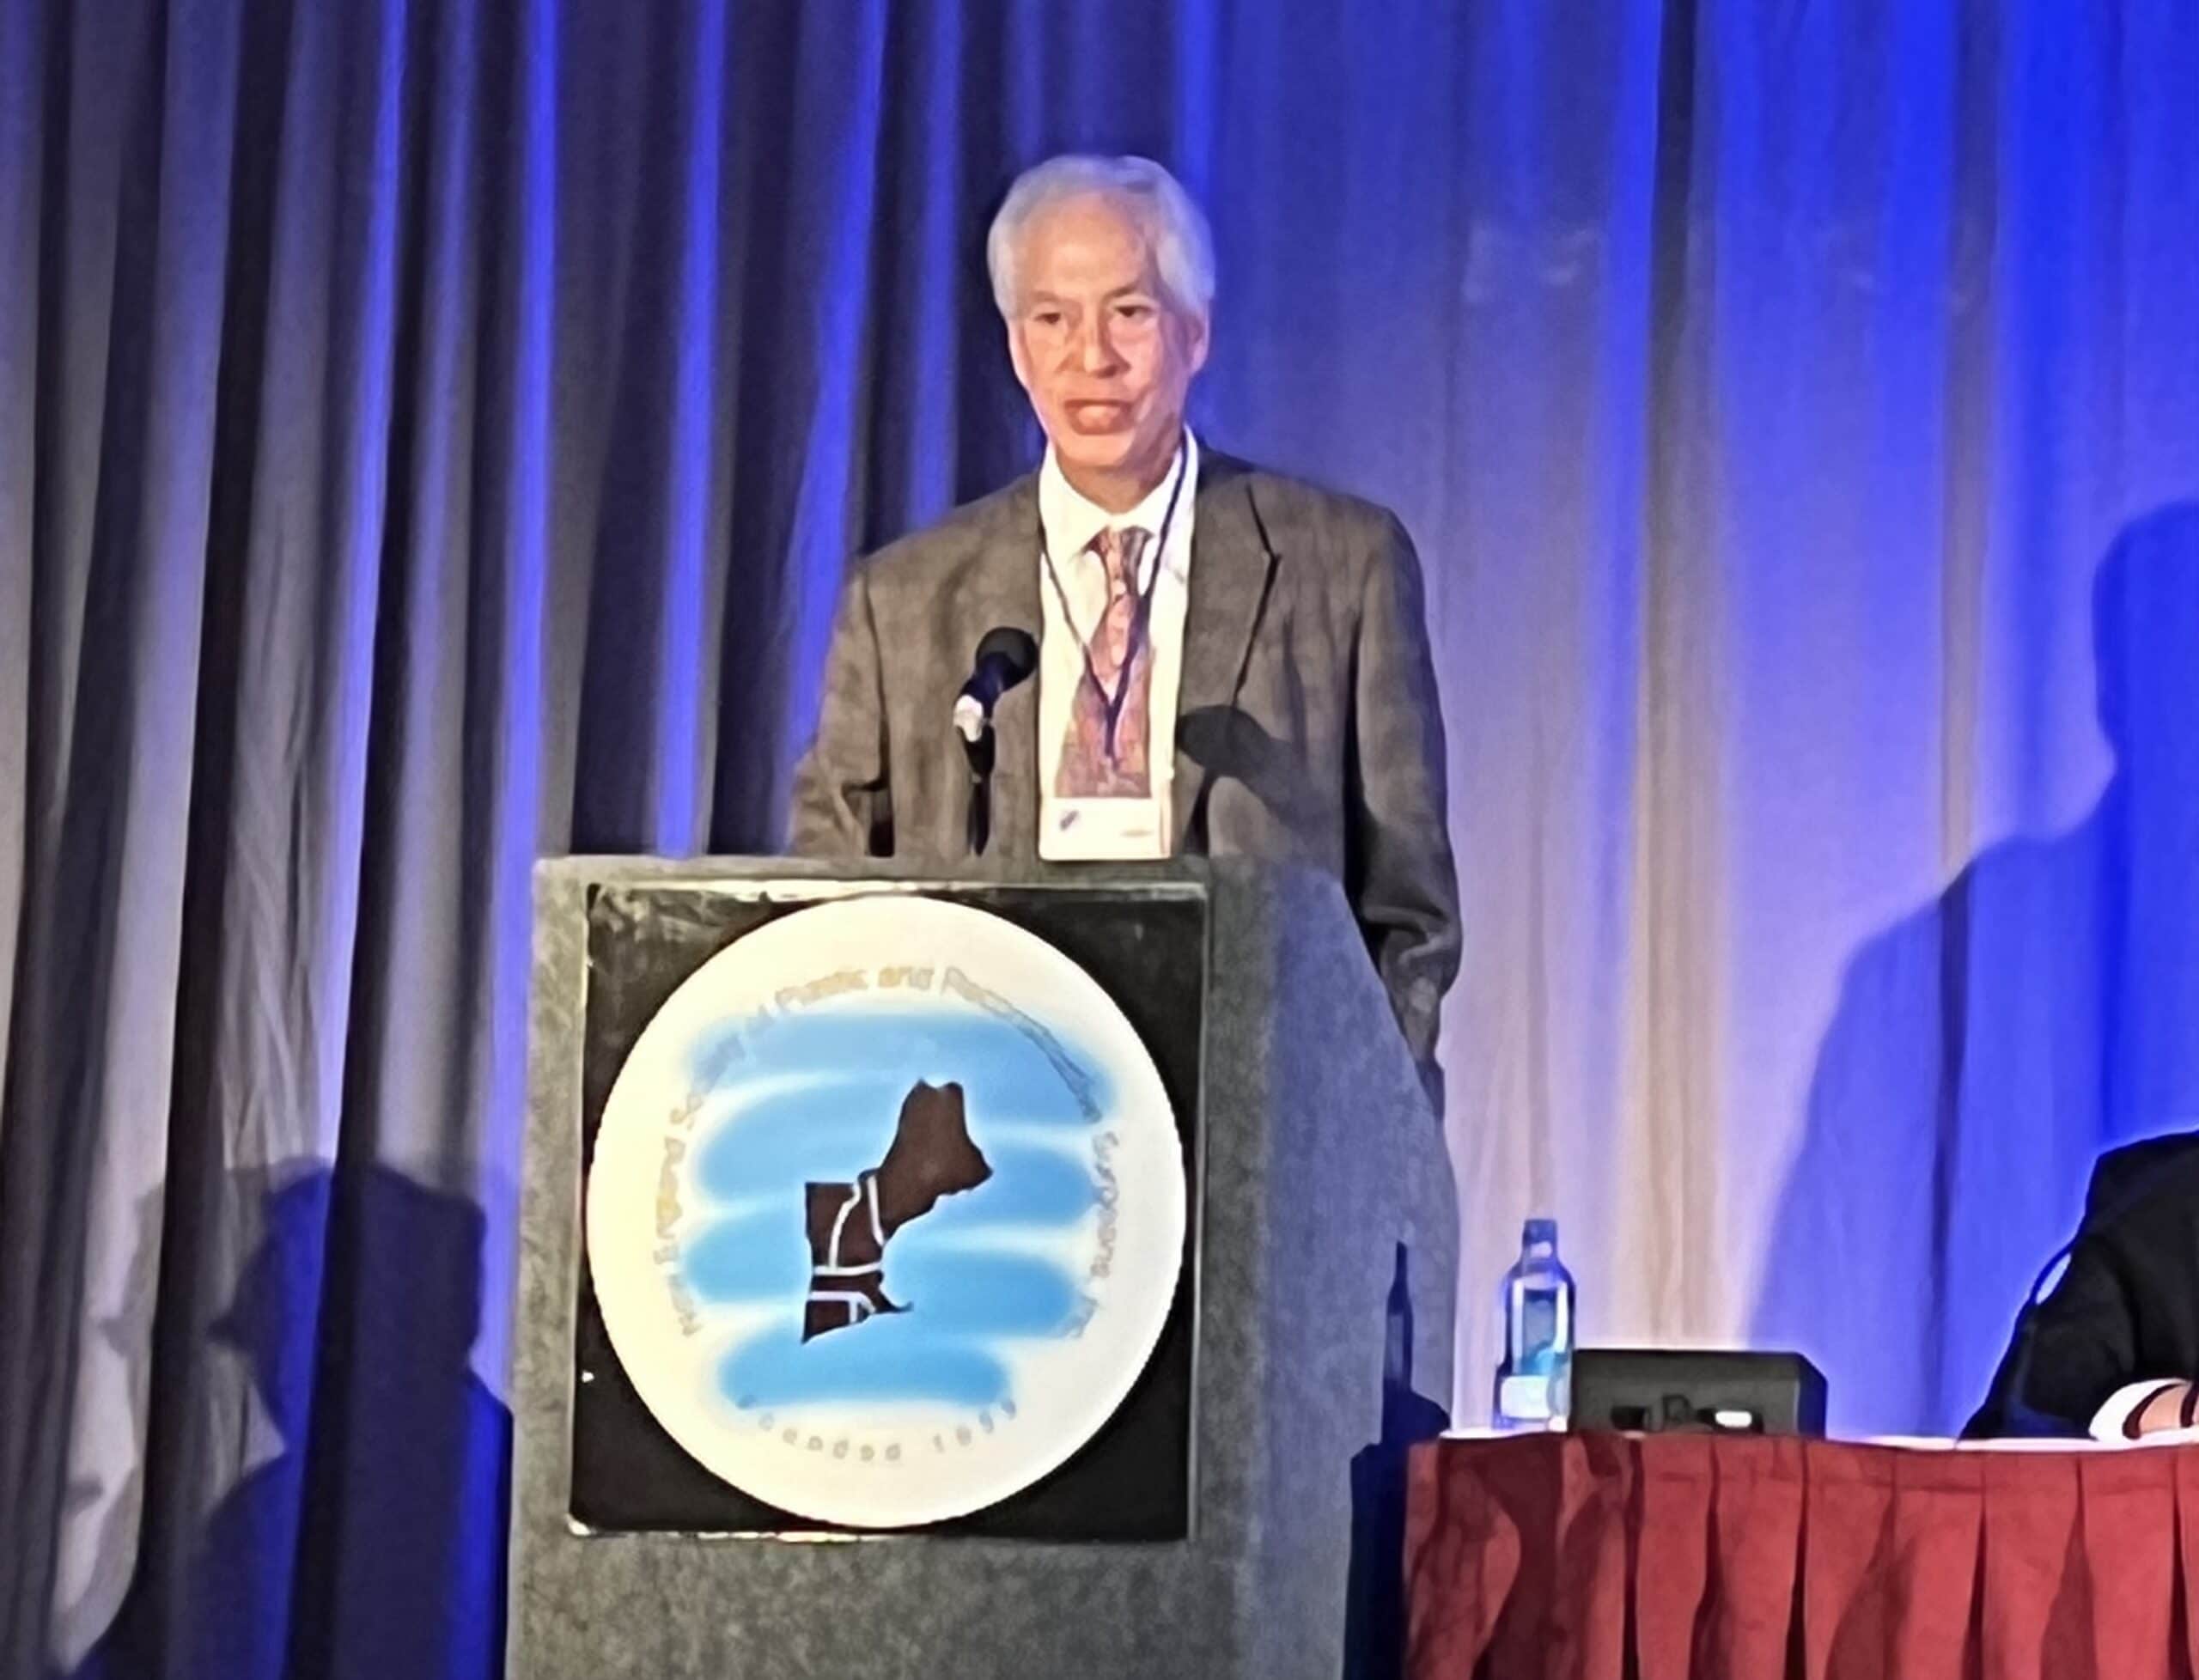 Dr. Gray speaks on breast reduction with liposuction at the 62nd Annual Meeting of the New England Society of Plastic Surgeons held at the Wentworth Hotel, New Castle, New Hampshire